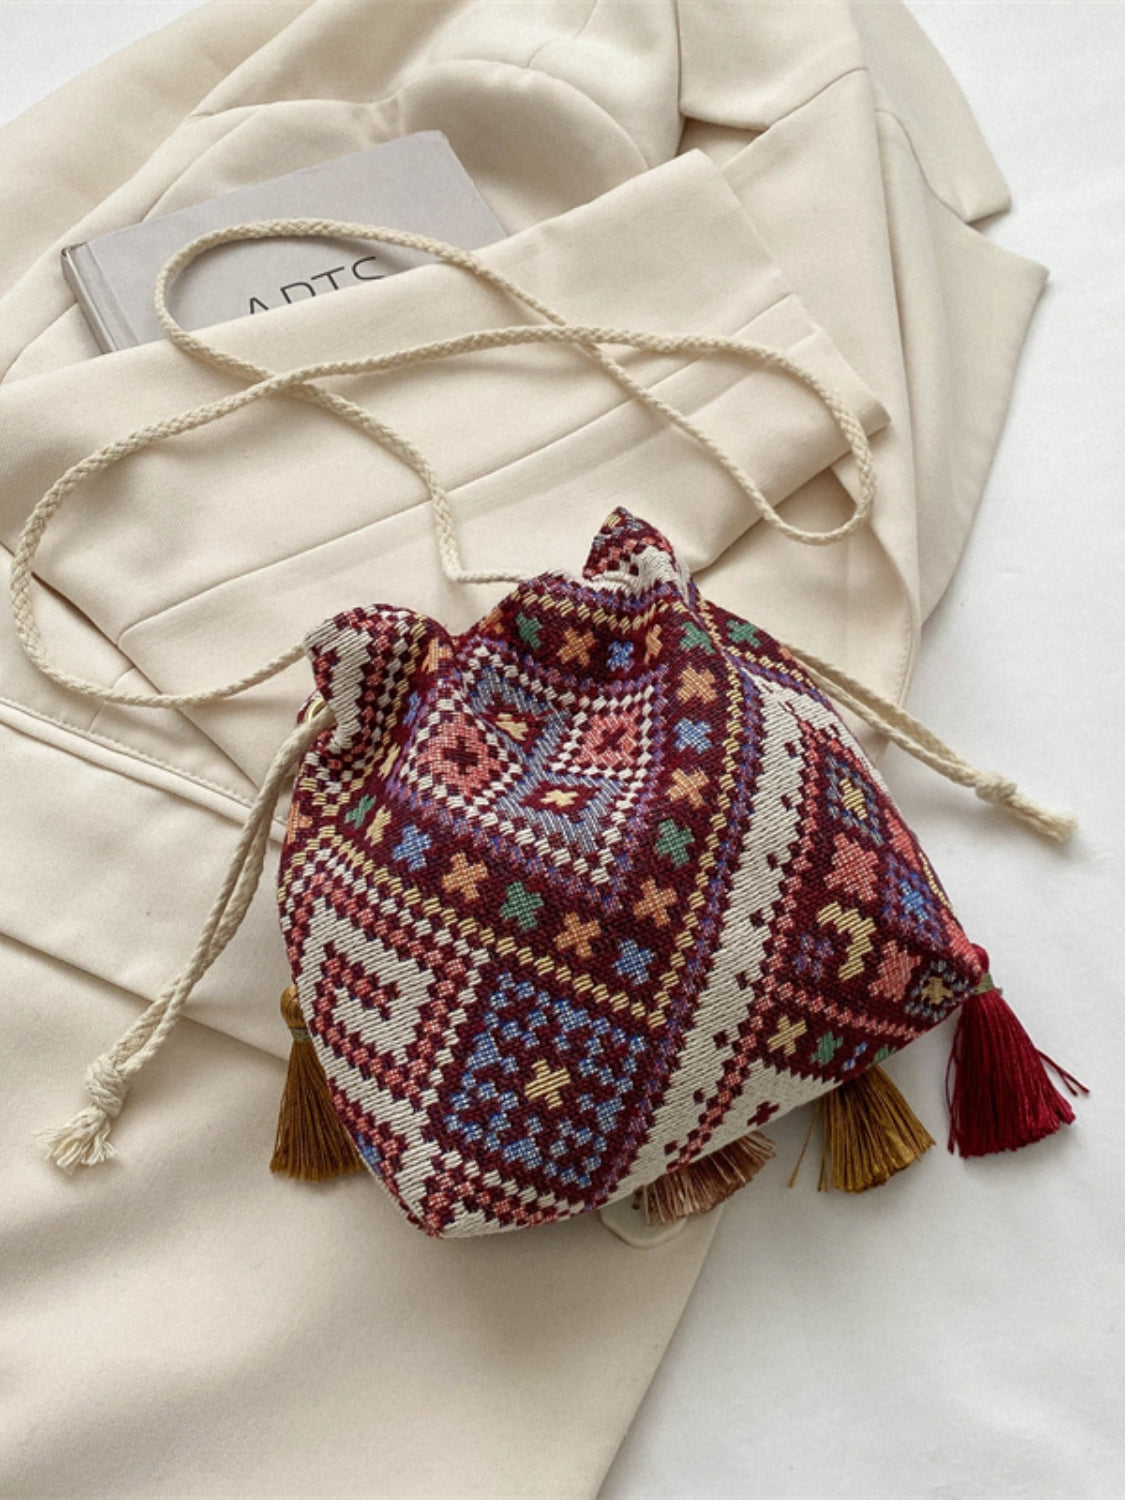 Wine-colored pouch bag with vibrant geometric designs and tassel accents.